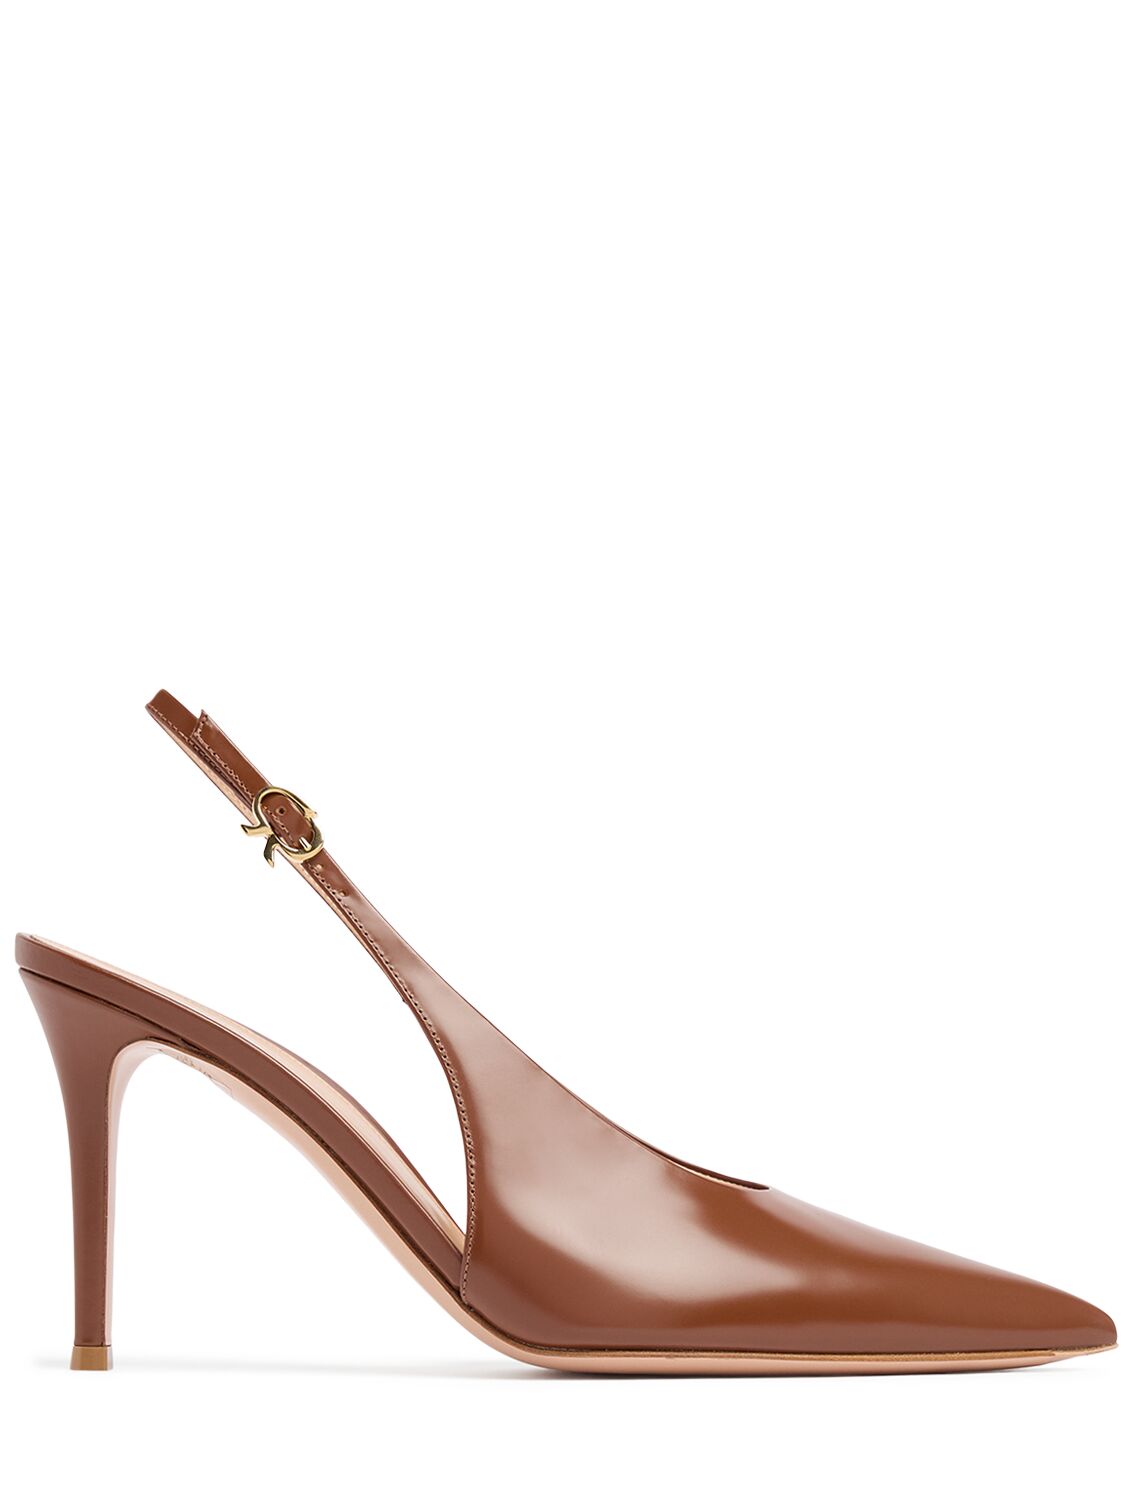 Gianvito Rossi 85mm Tokio Leather Slingback Pumps In Brown